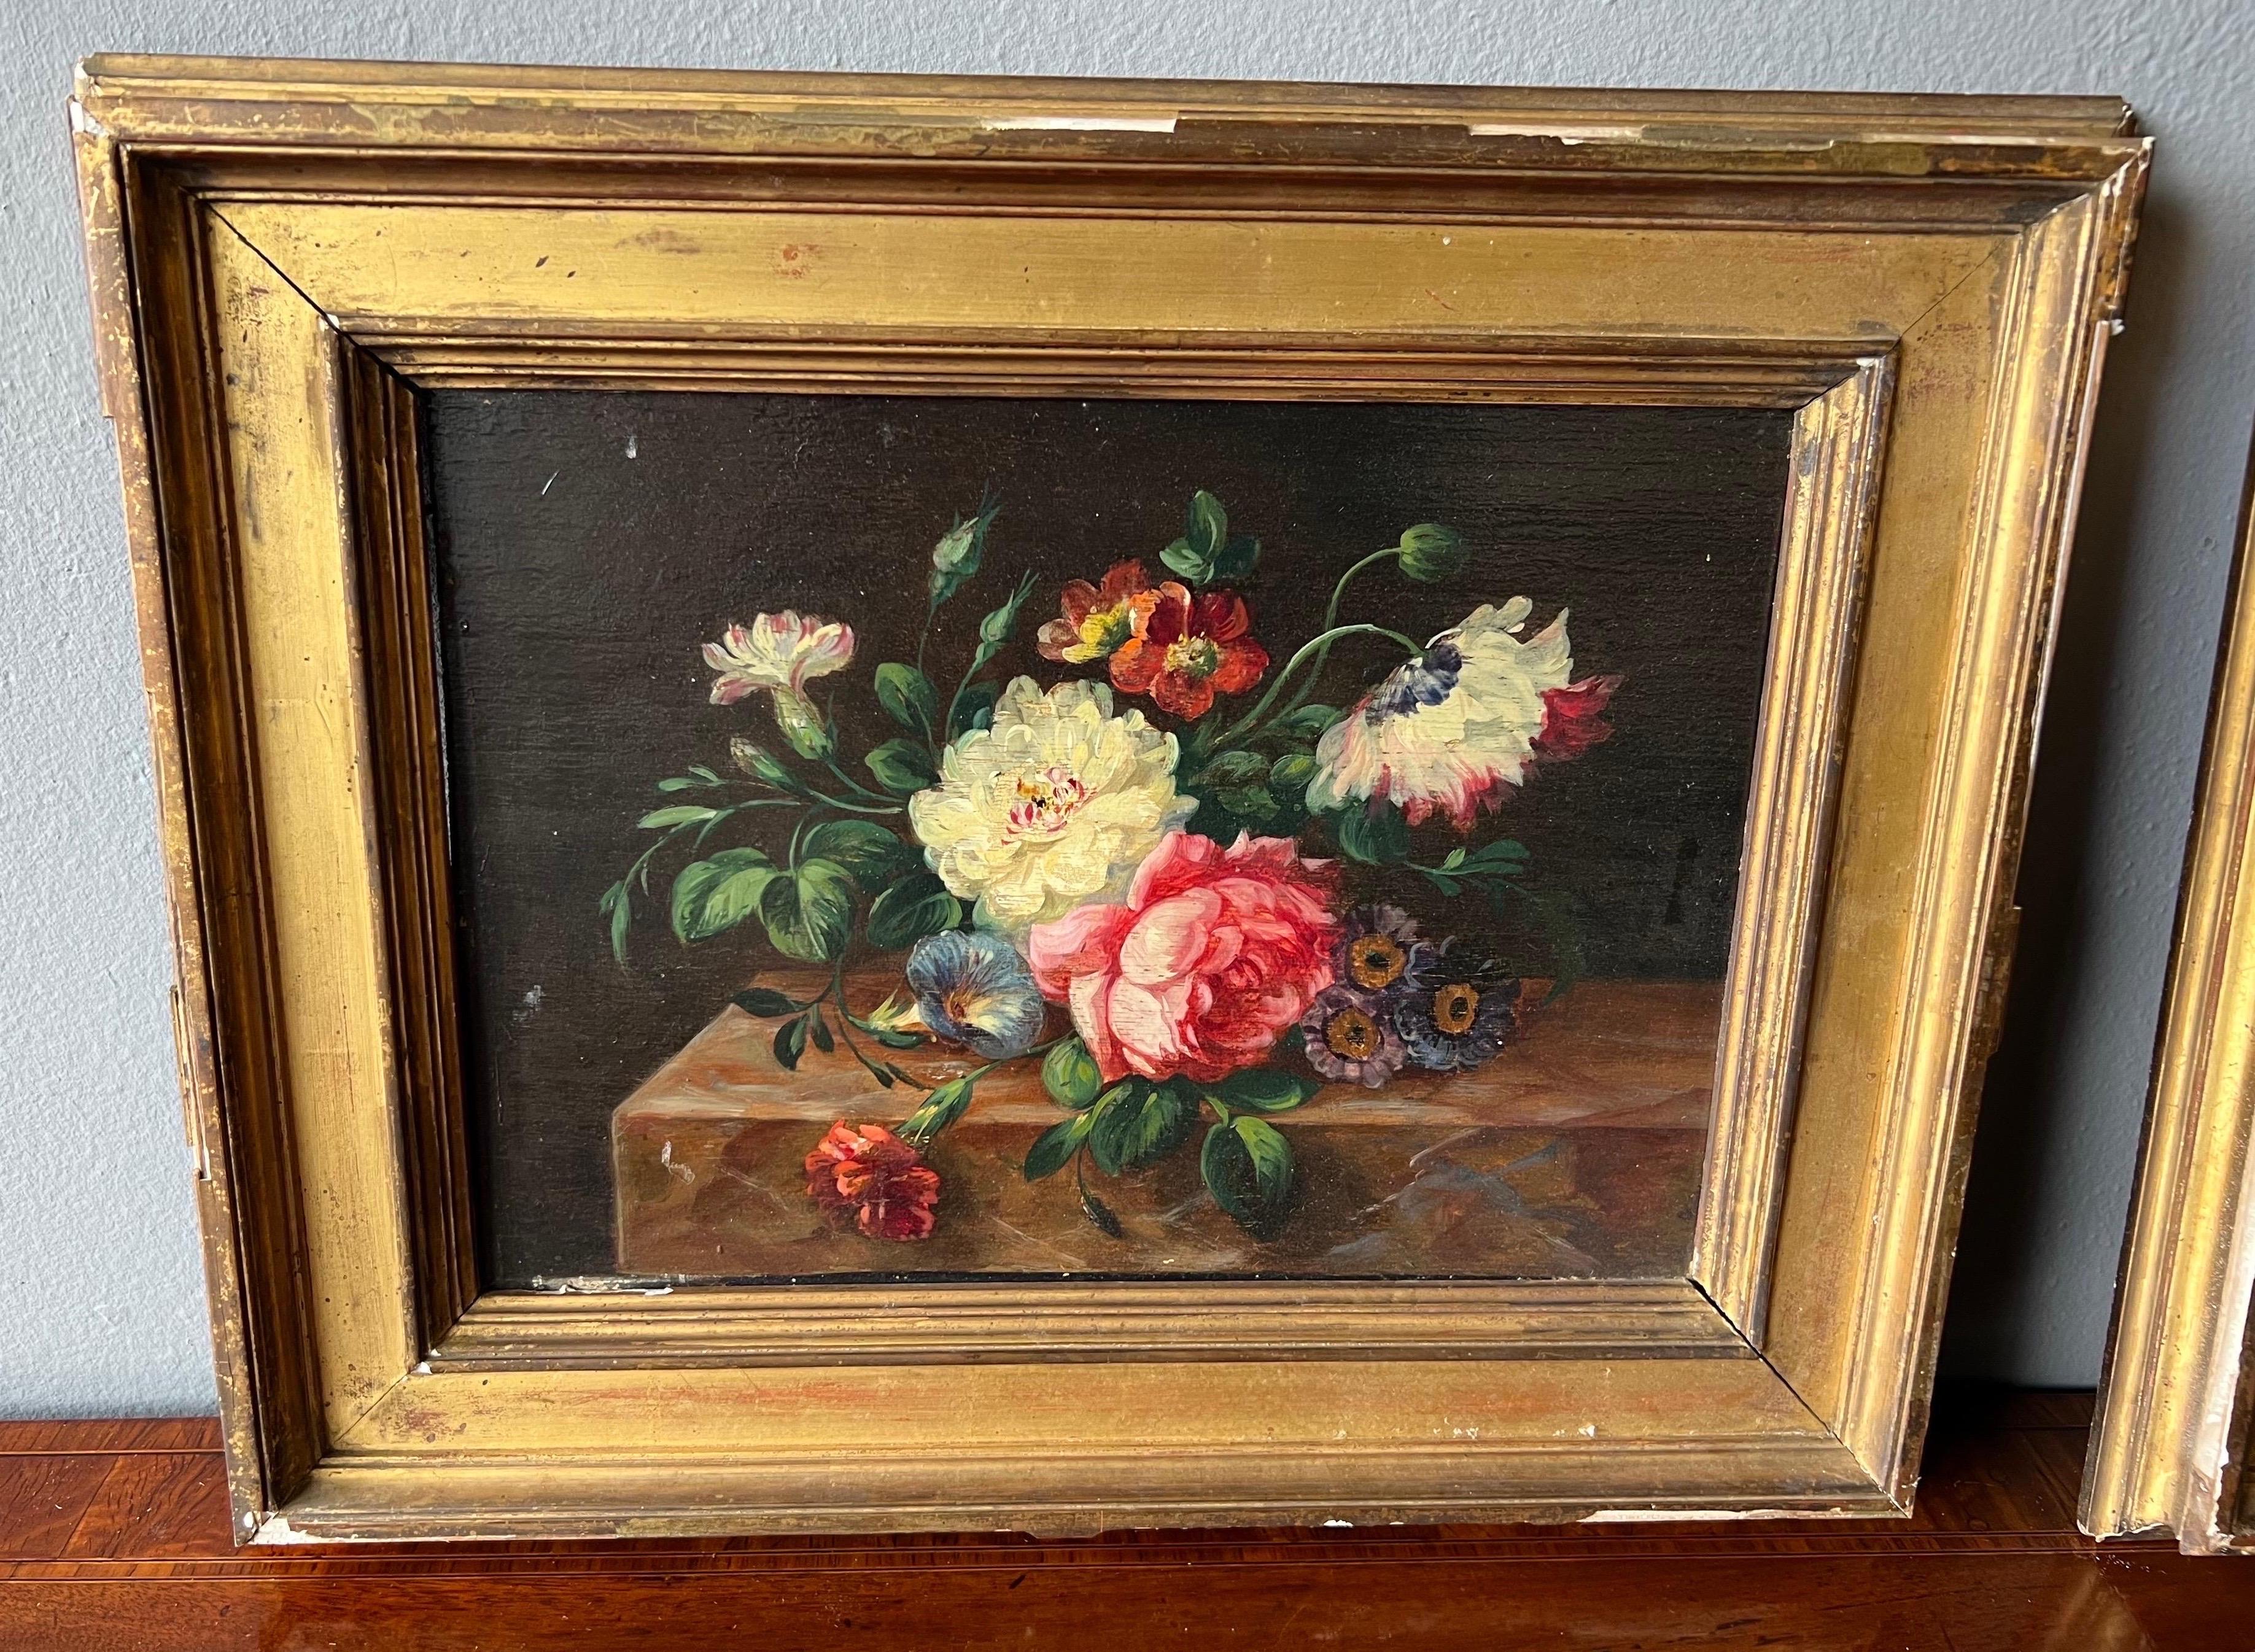 Belgian Pair of Small Scale 18th-19th Century Flemish School Still Life Oil on Boards